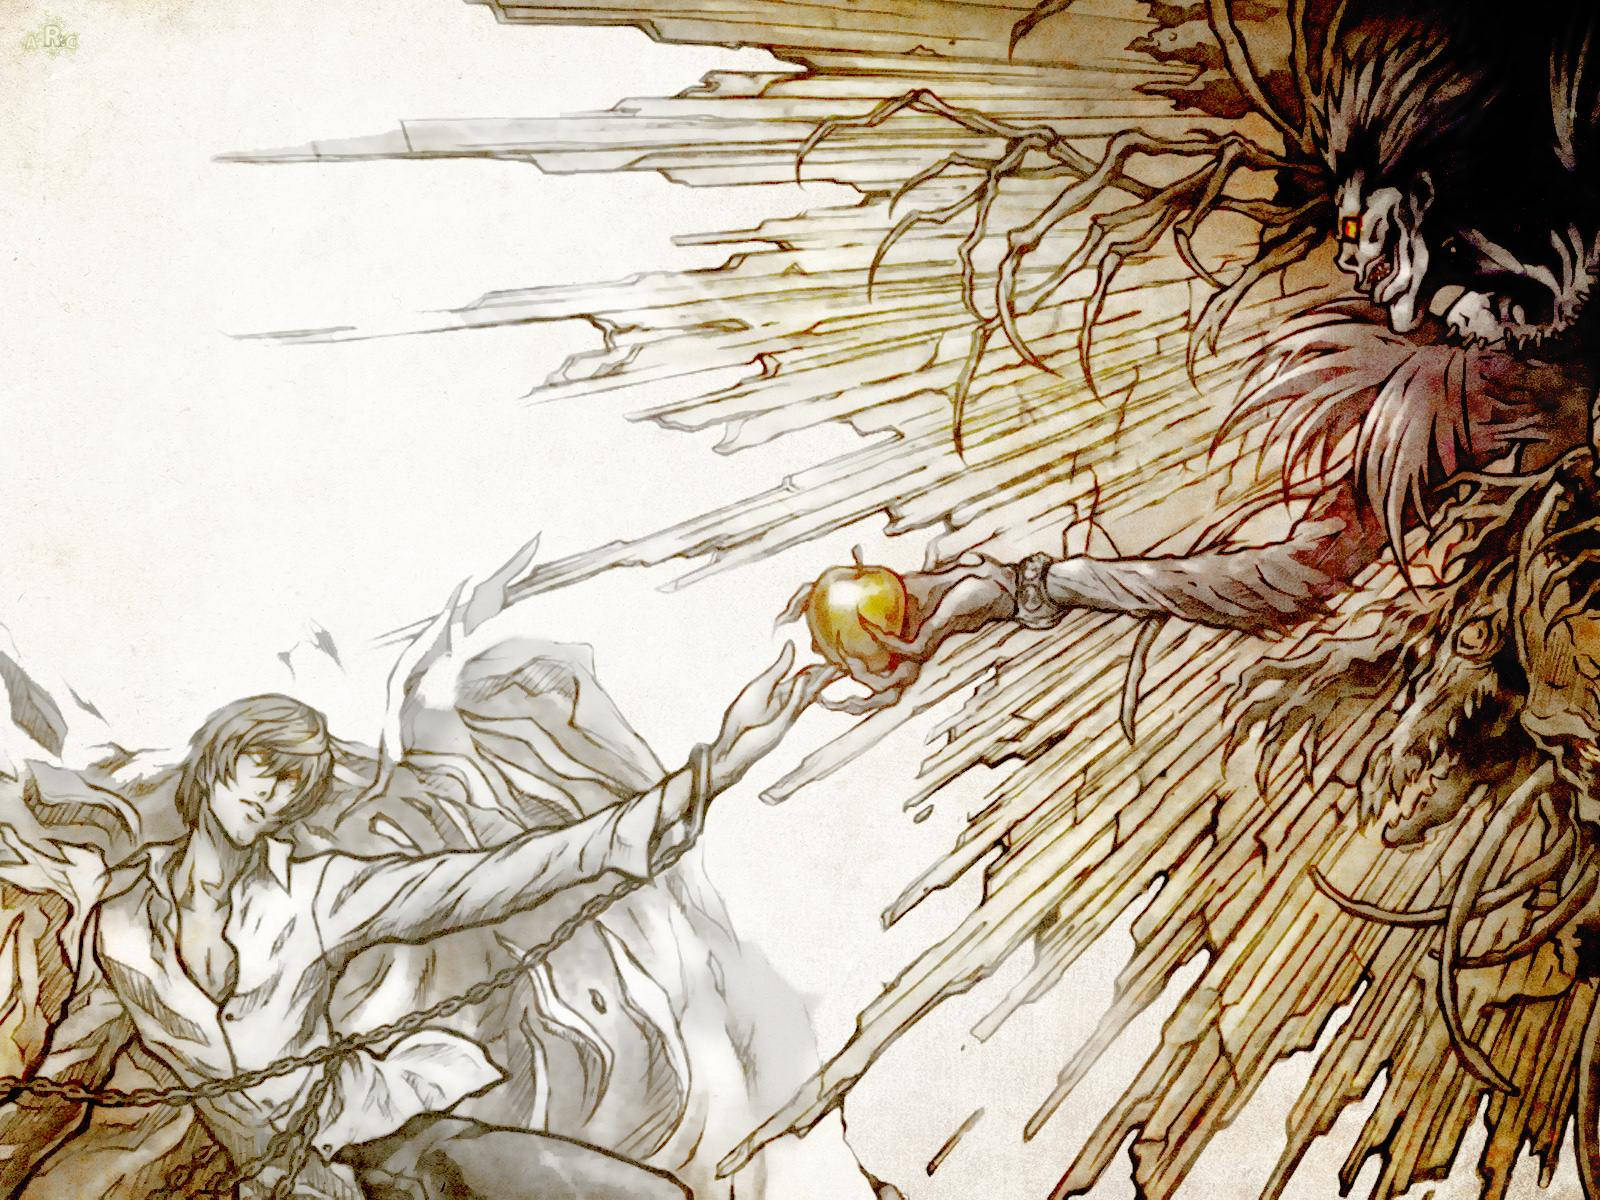 A Light and Ryuk from Death Note Wallpaper